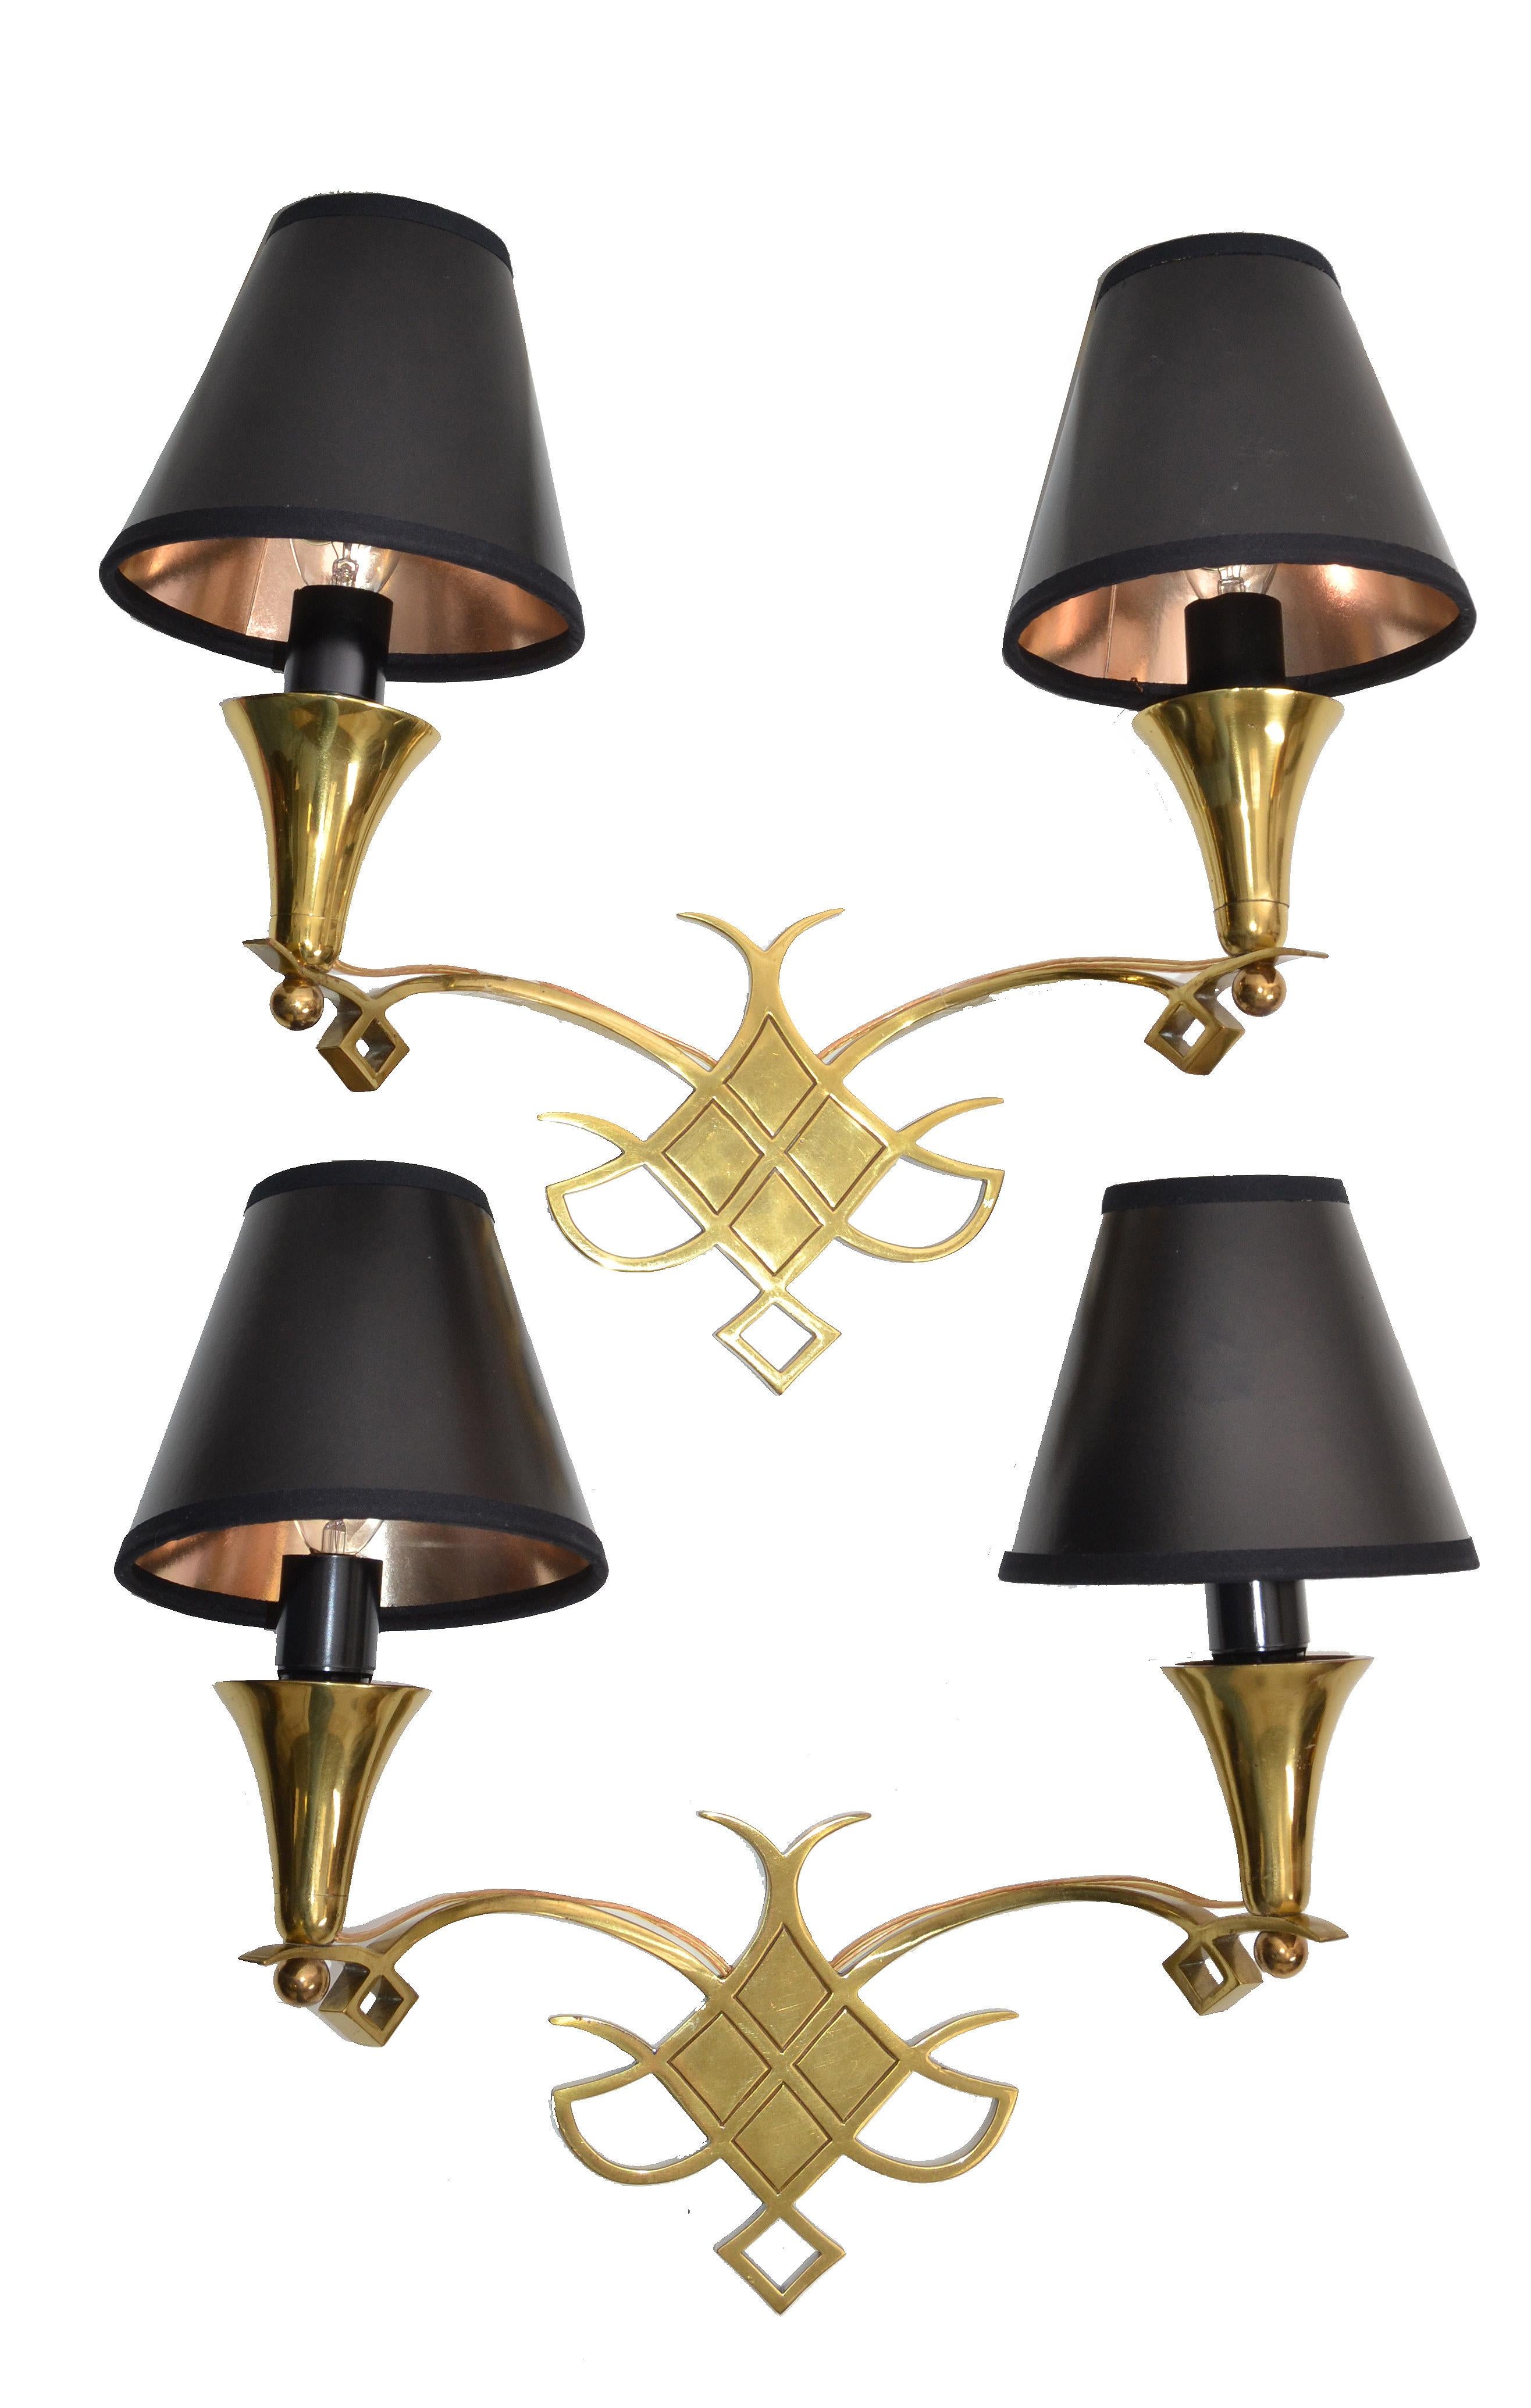 Very elegant pair of brass sconces, wall lights in the style of Jules Leleu.
The Set is rewired for the US and each sconce takes two 40 watts light bulbs.
Sold with black & gold clip on paper shades.
French Mid-Century Modern design from the late